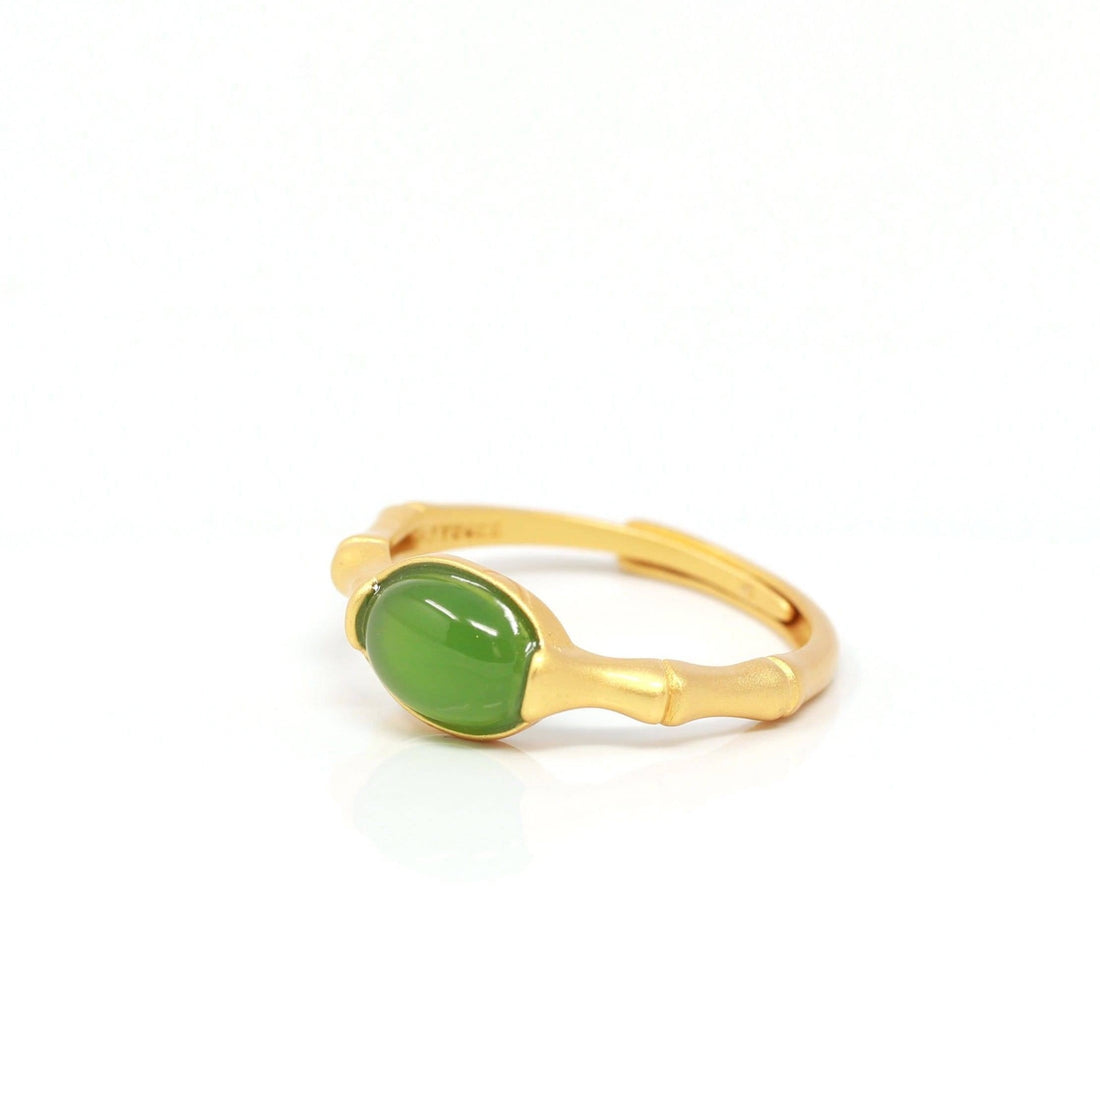 Baikalla™ "Classic Oval" Sterling Silver Real Green Nephrite Jade Bamboo Ring For Her-Baikalla Happy Valley Oregon